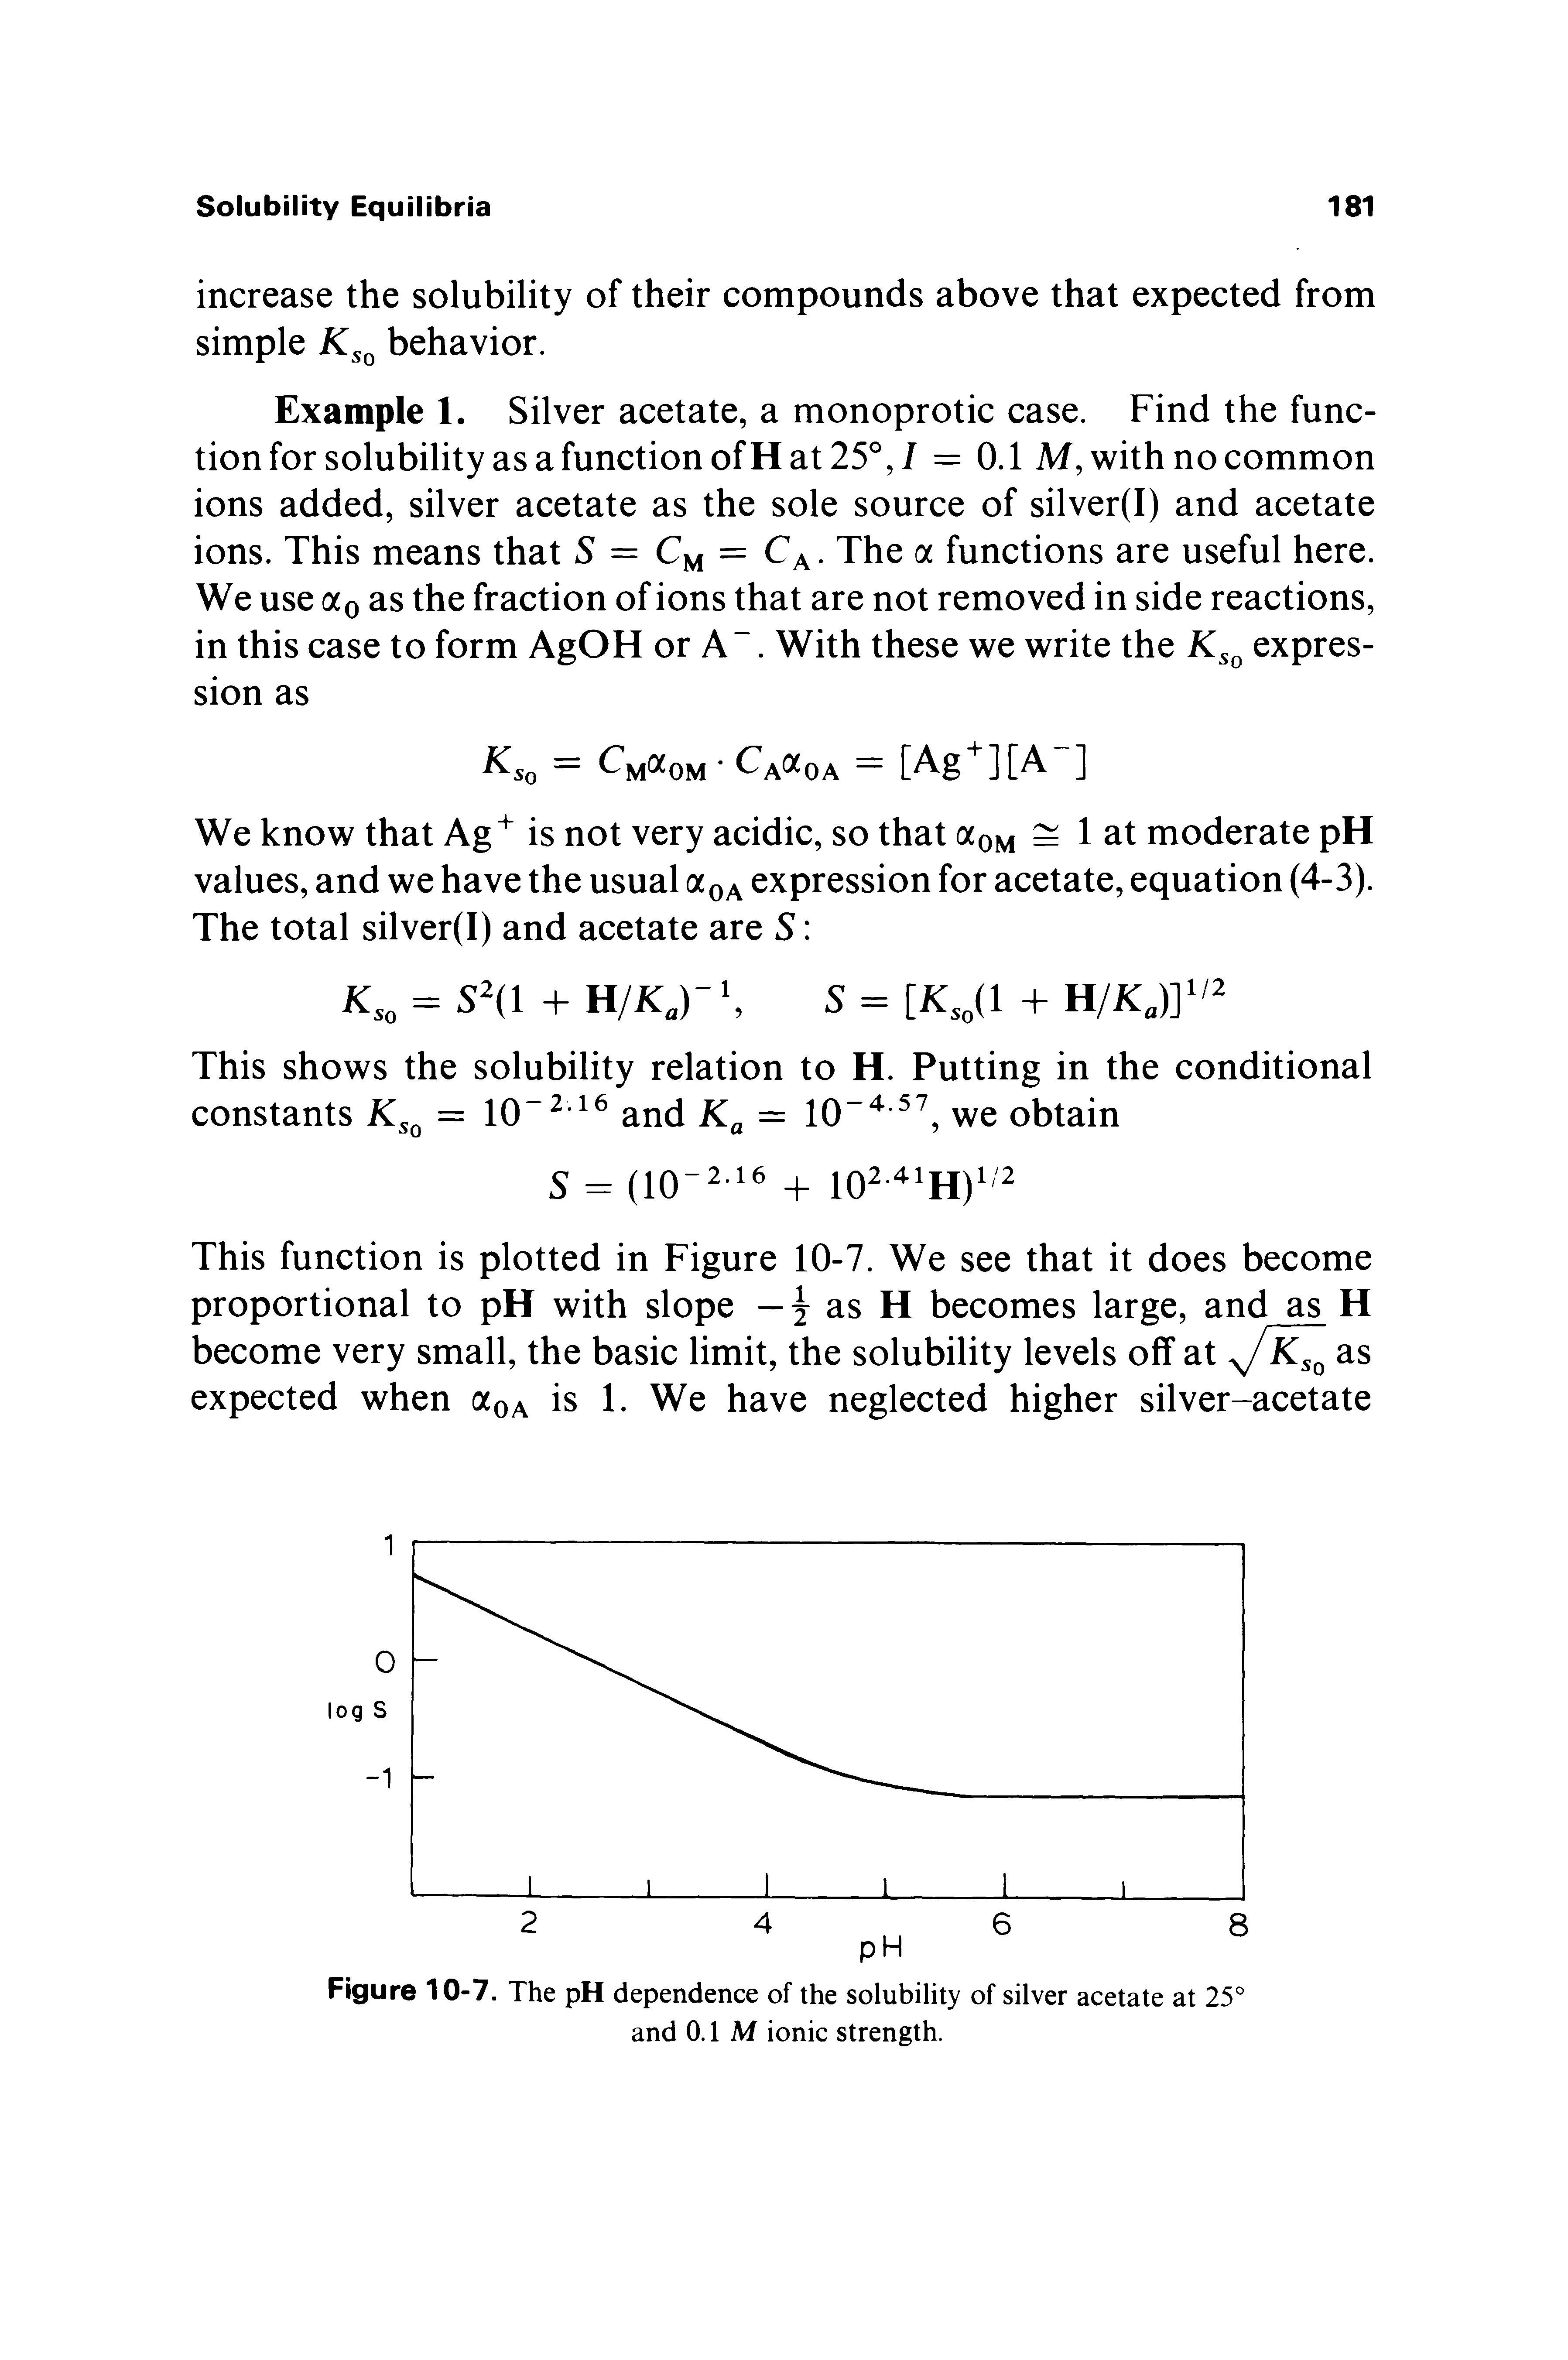 Figure 10-7. The pH dependence of the solubility of silver acetate at 25° and 0.1 M ionic strength.